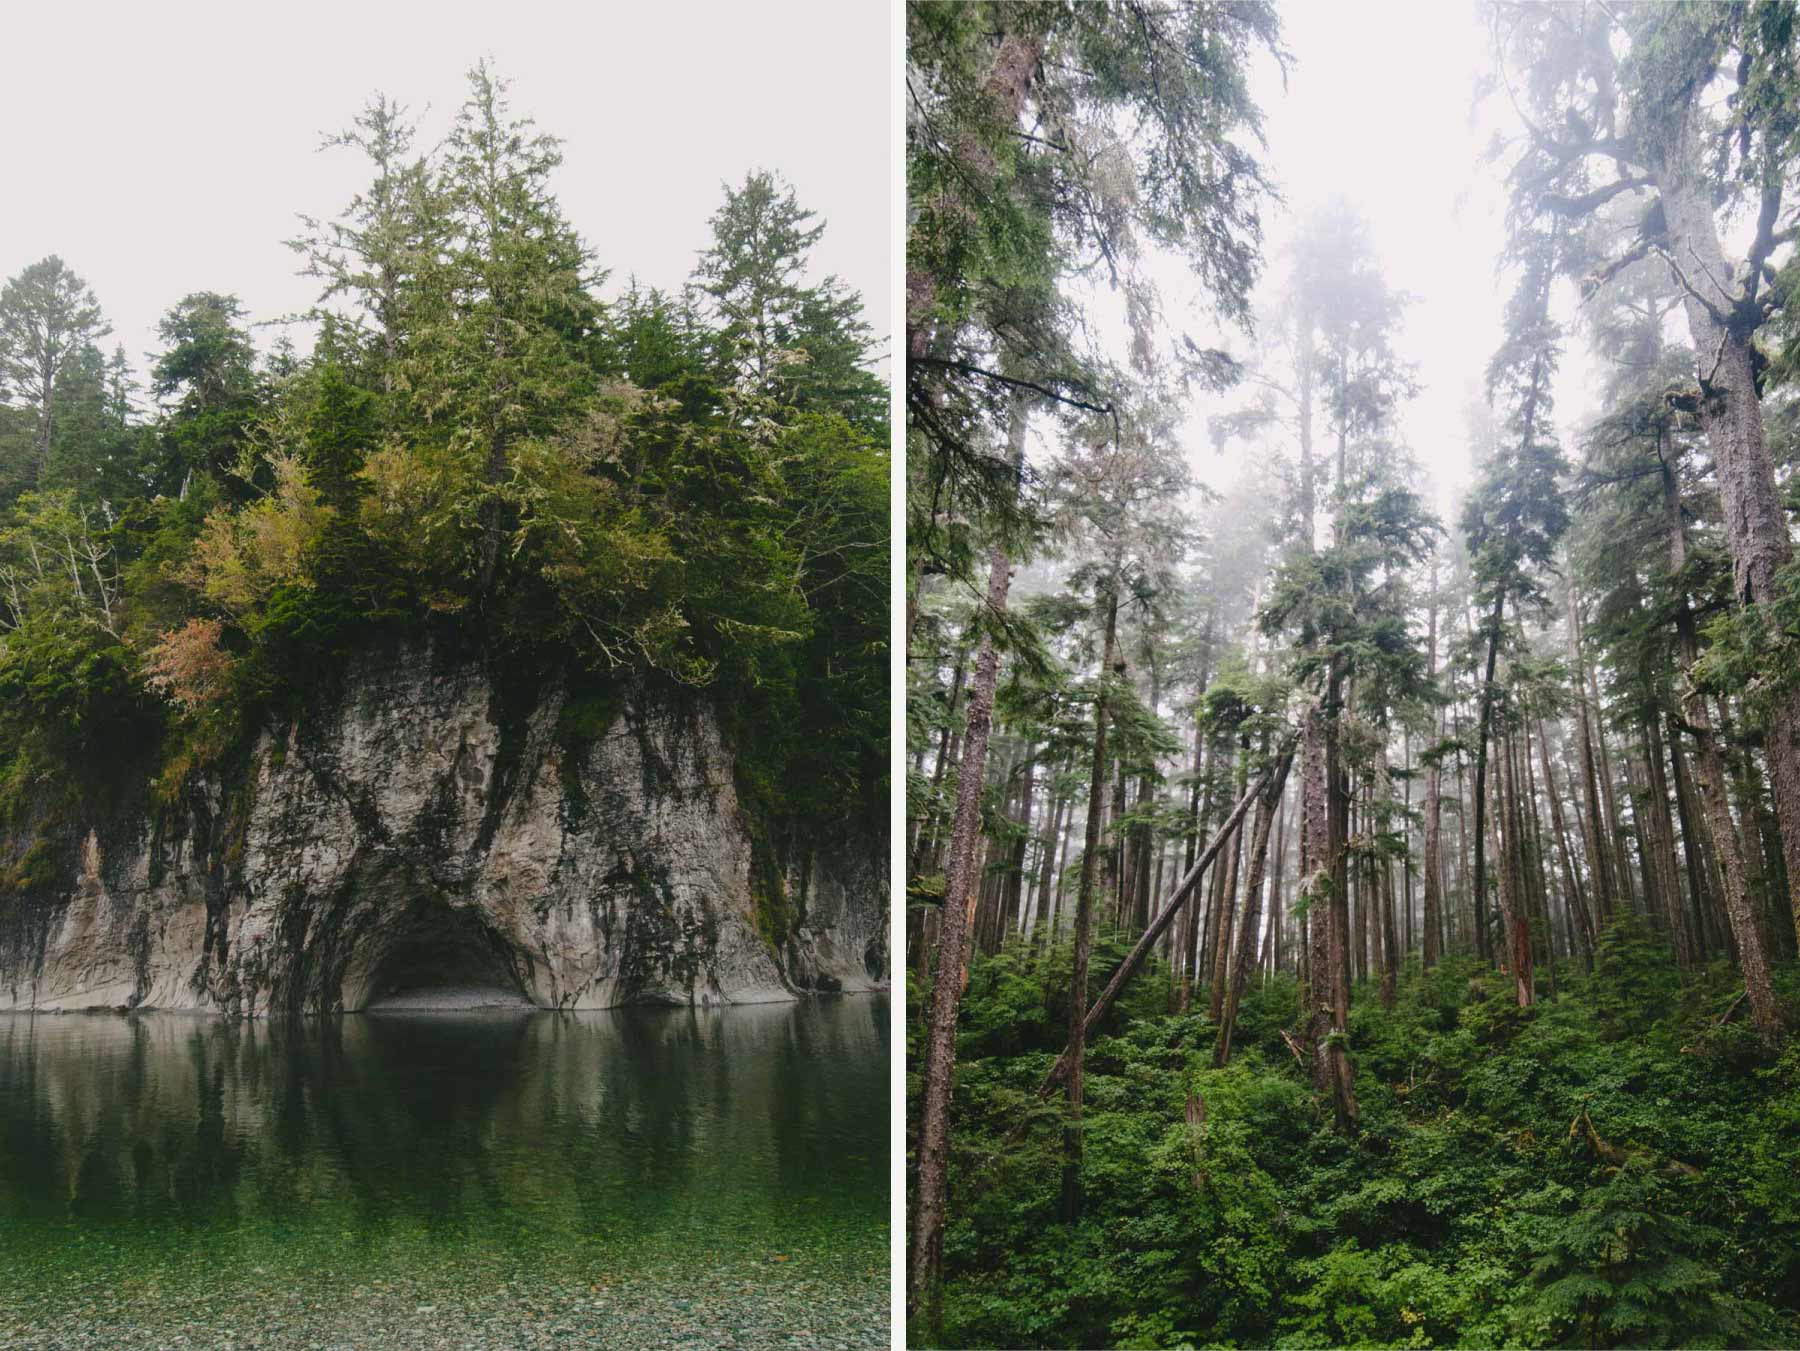 Thick forests and sea caves on the West Coast Trail